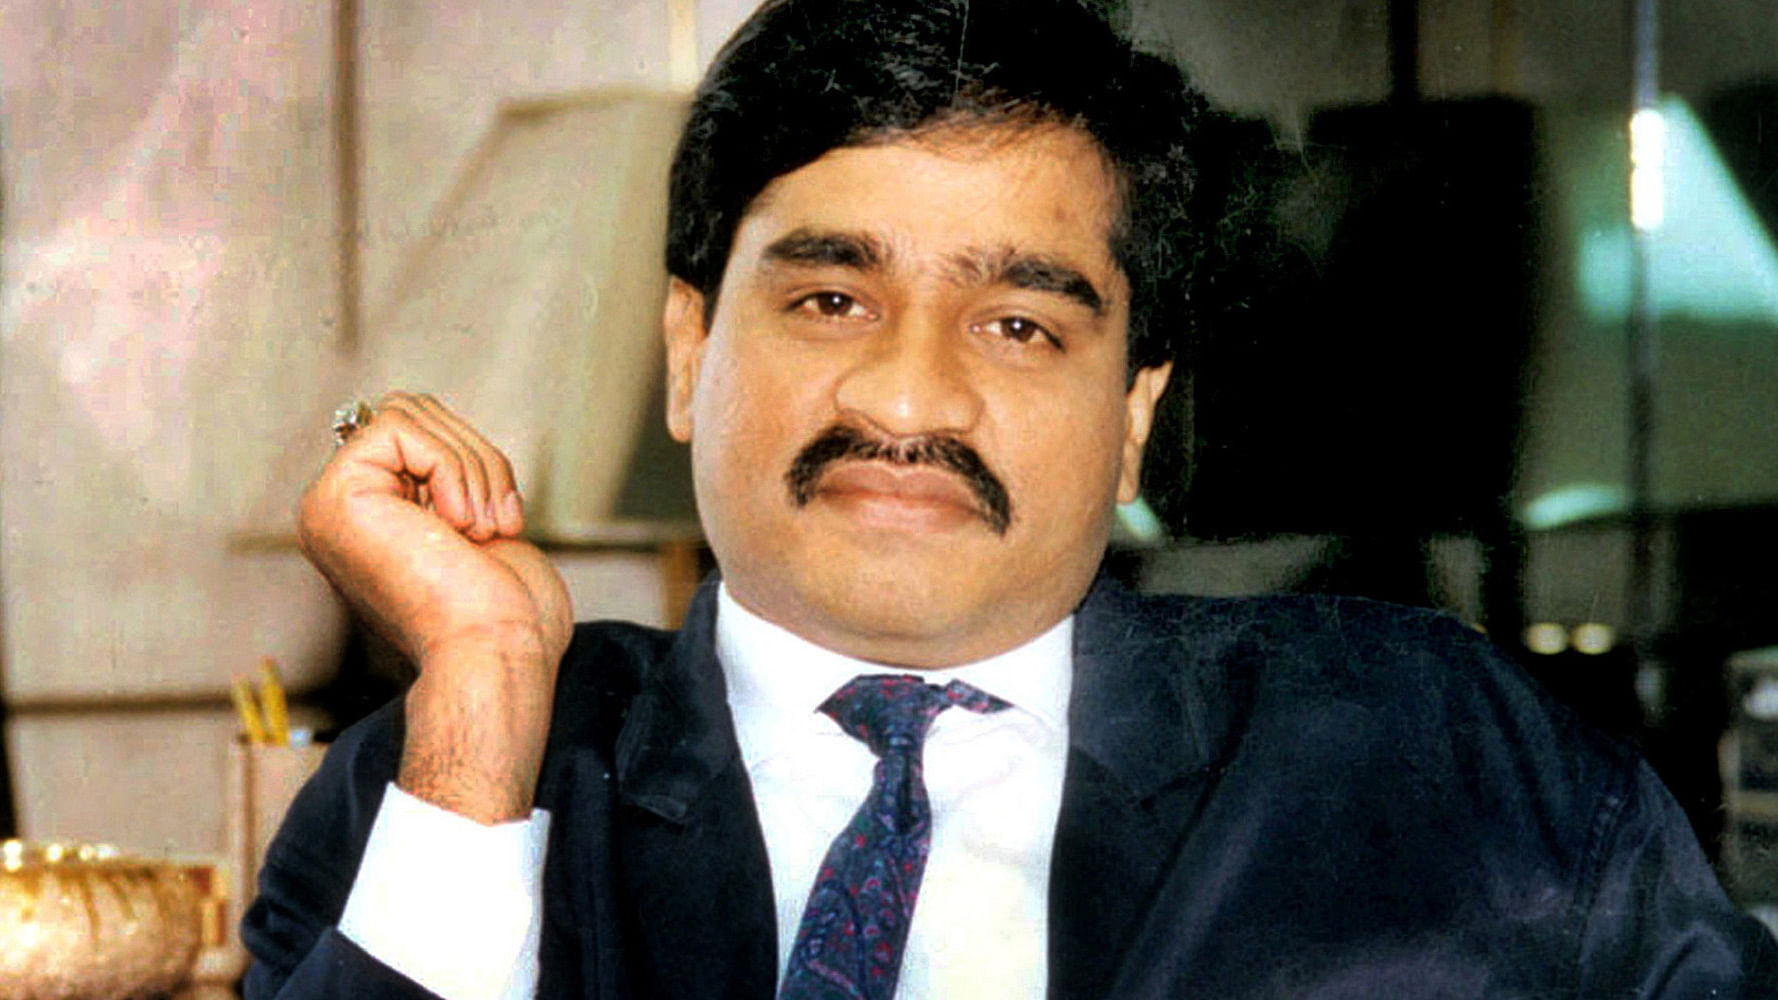 Dawood Ibrahim in an undated photo in an unknown location. (Photo: AP)